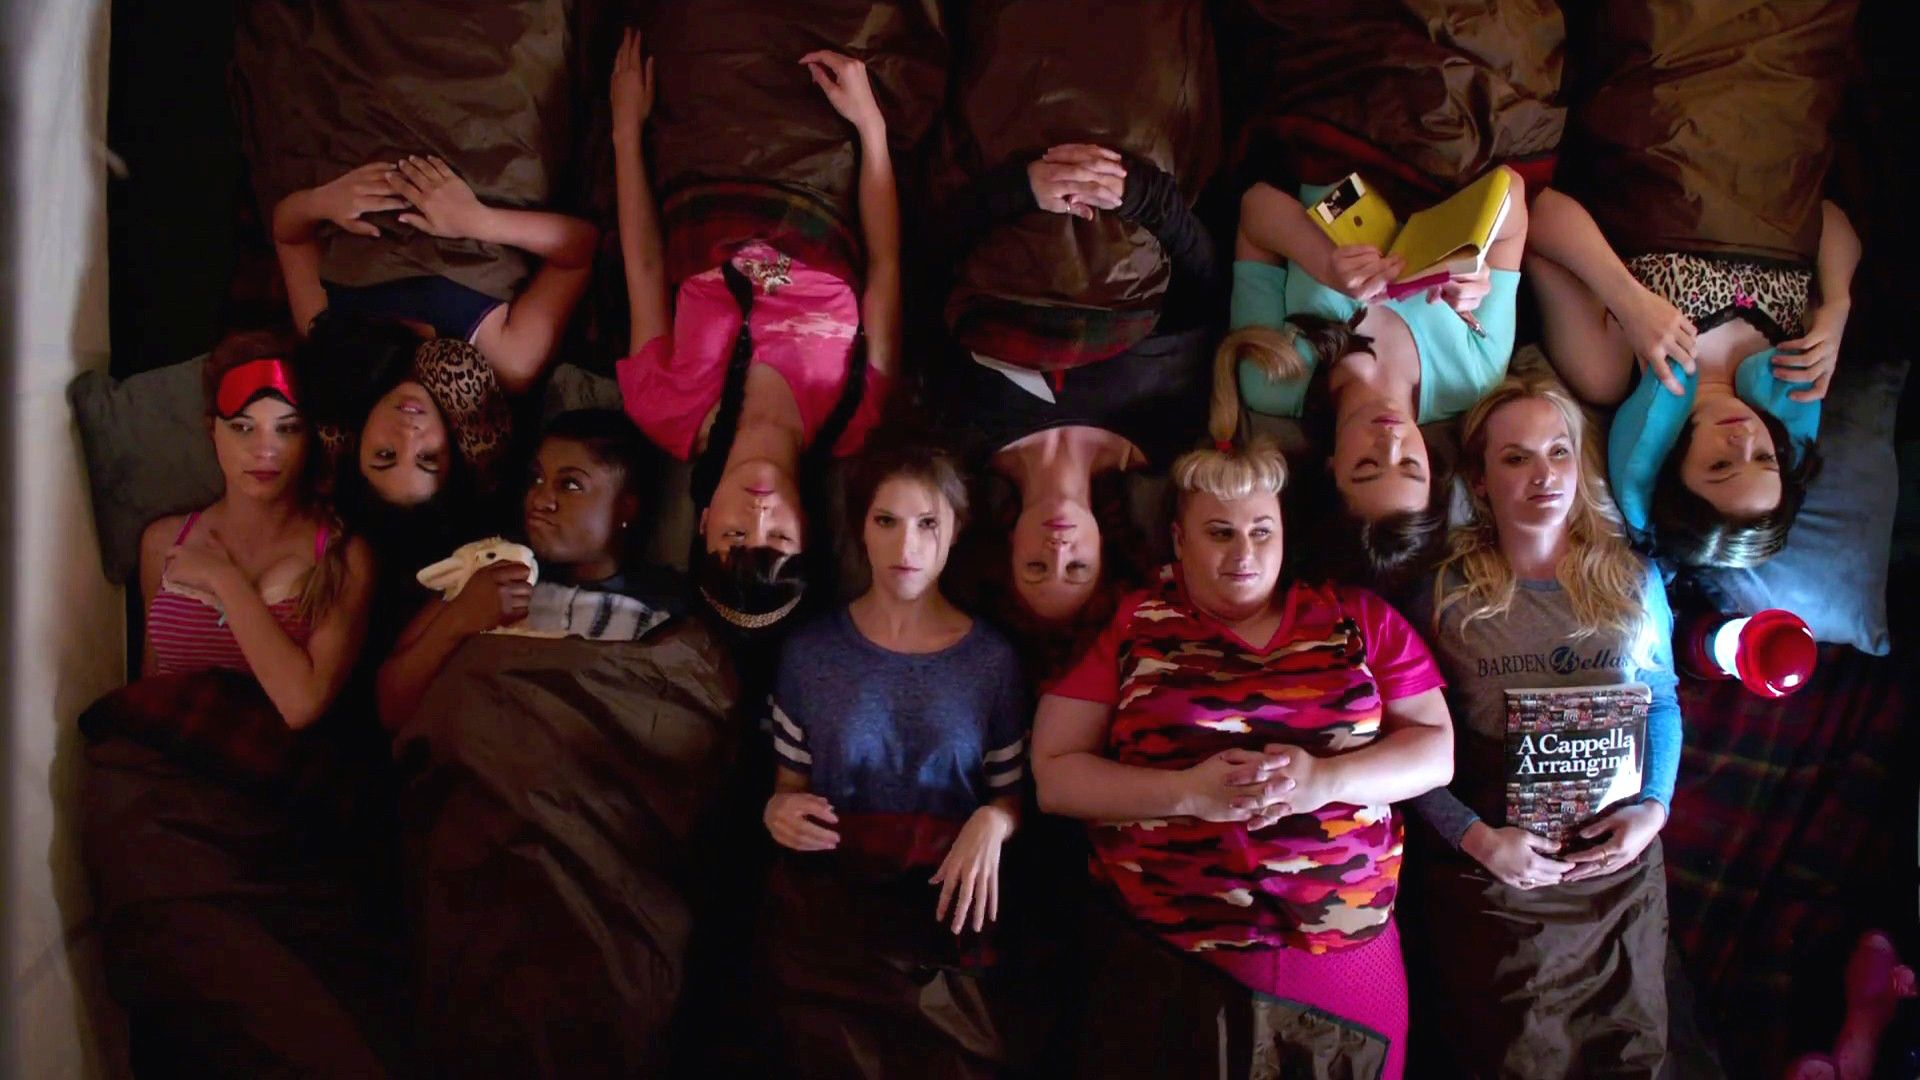 1920x1080 This Rehearsal Footage from the Original 'Pitch Perfect' Is Legit Aca-Awesome